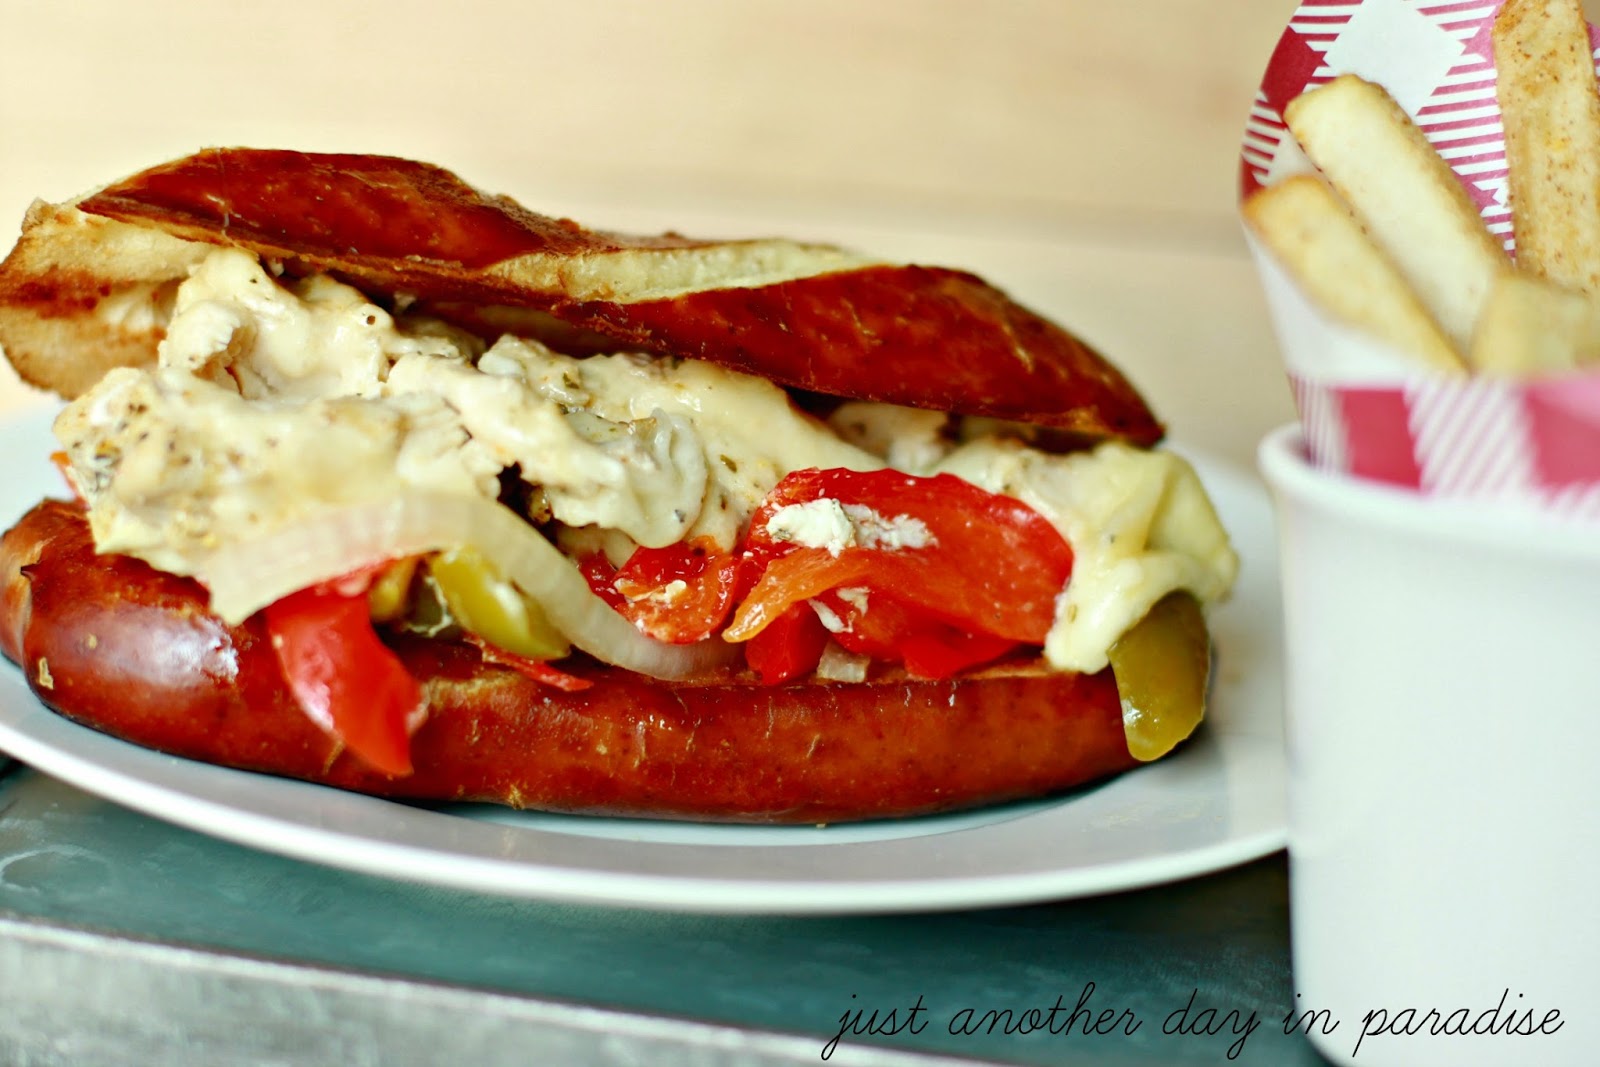 Larissa Another Day: Slow Cooker Saturday: Philly Cheese Chicken Sandwiches